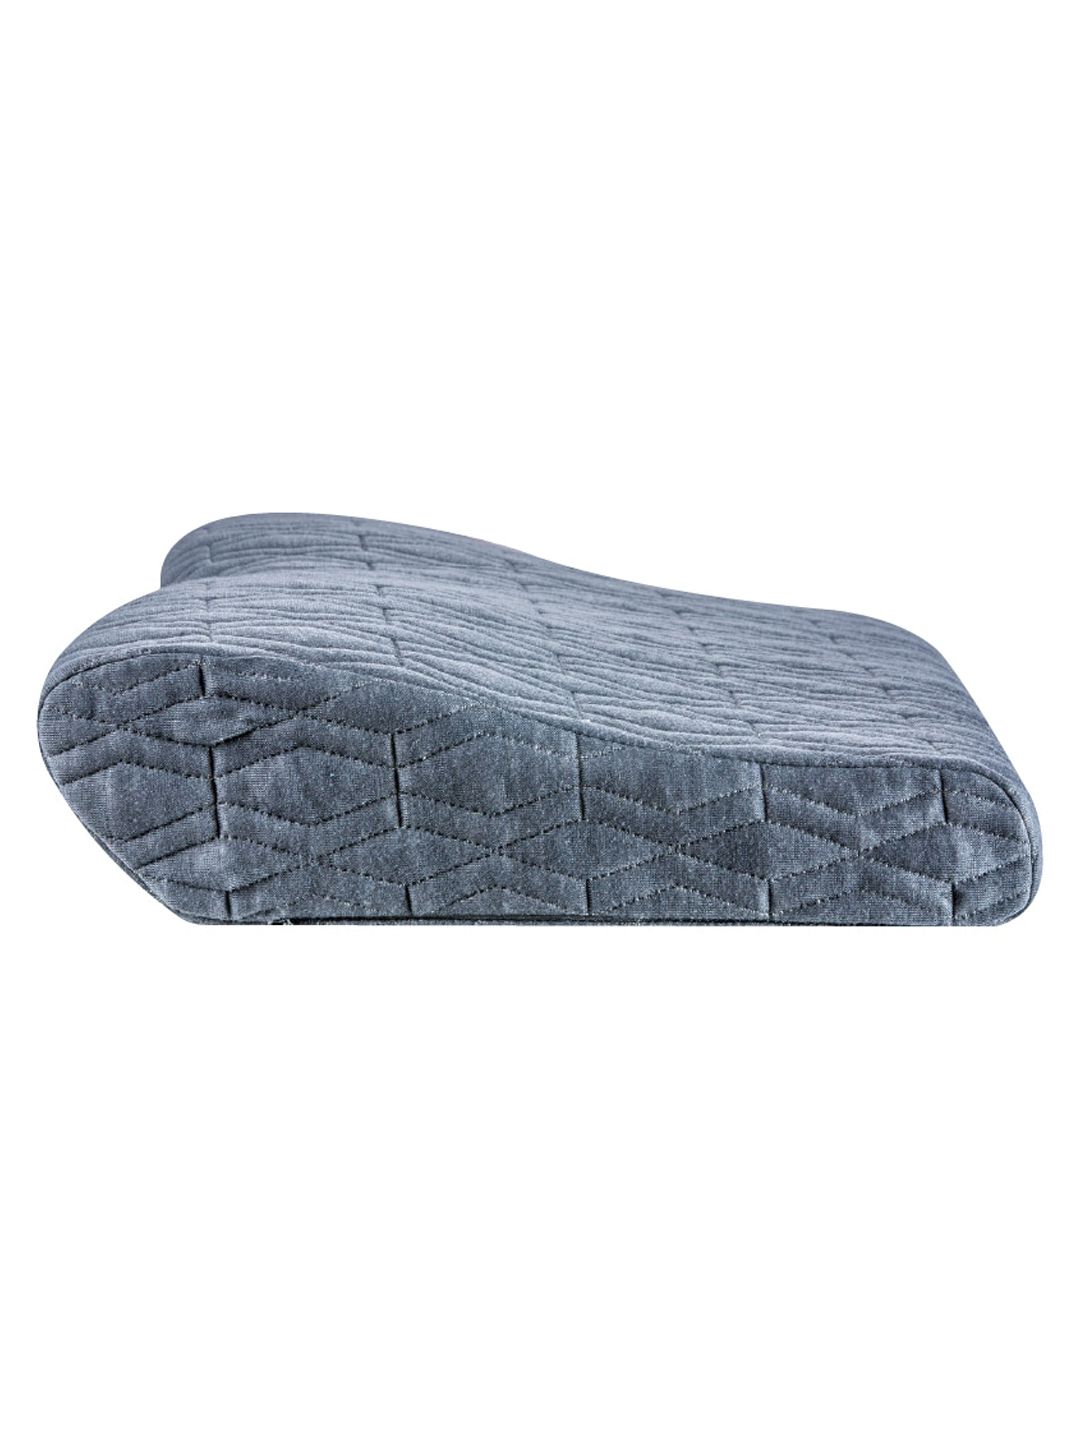 The White Willow Grey Memory Foam Neck Pillow Price in India